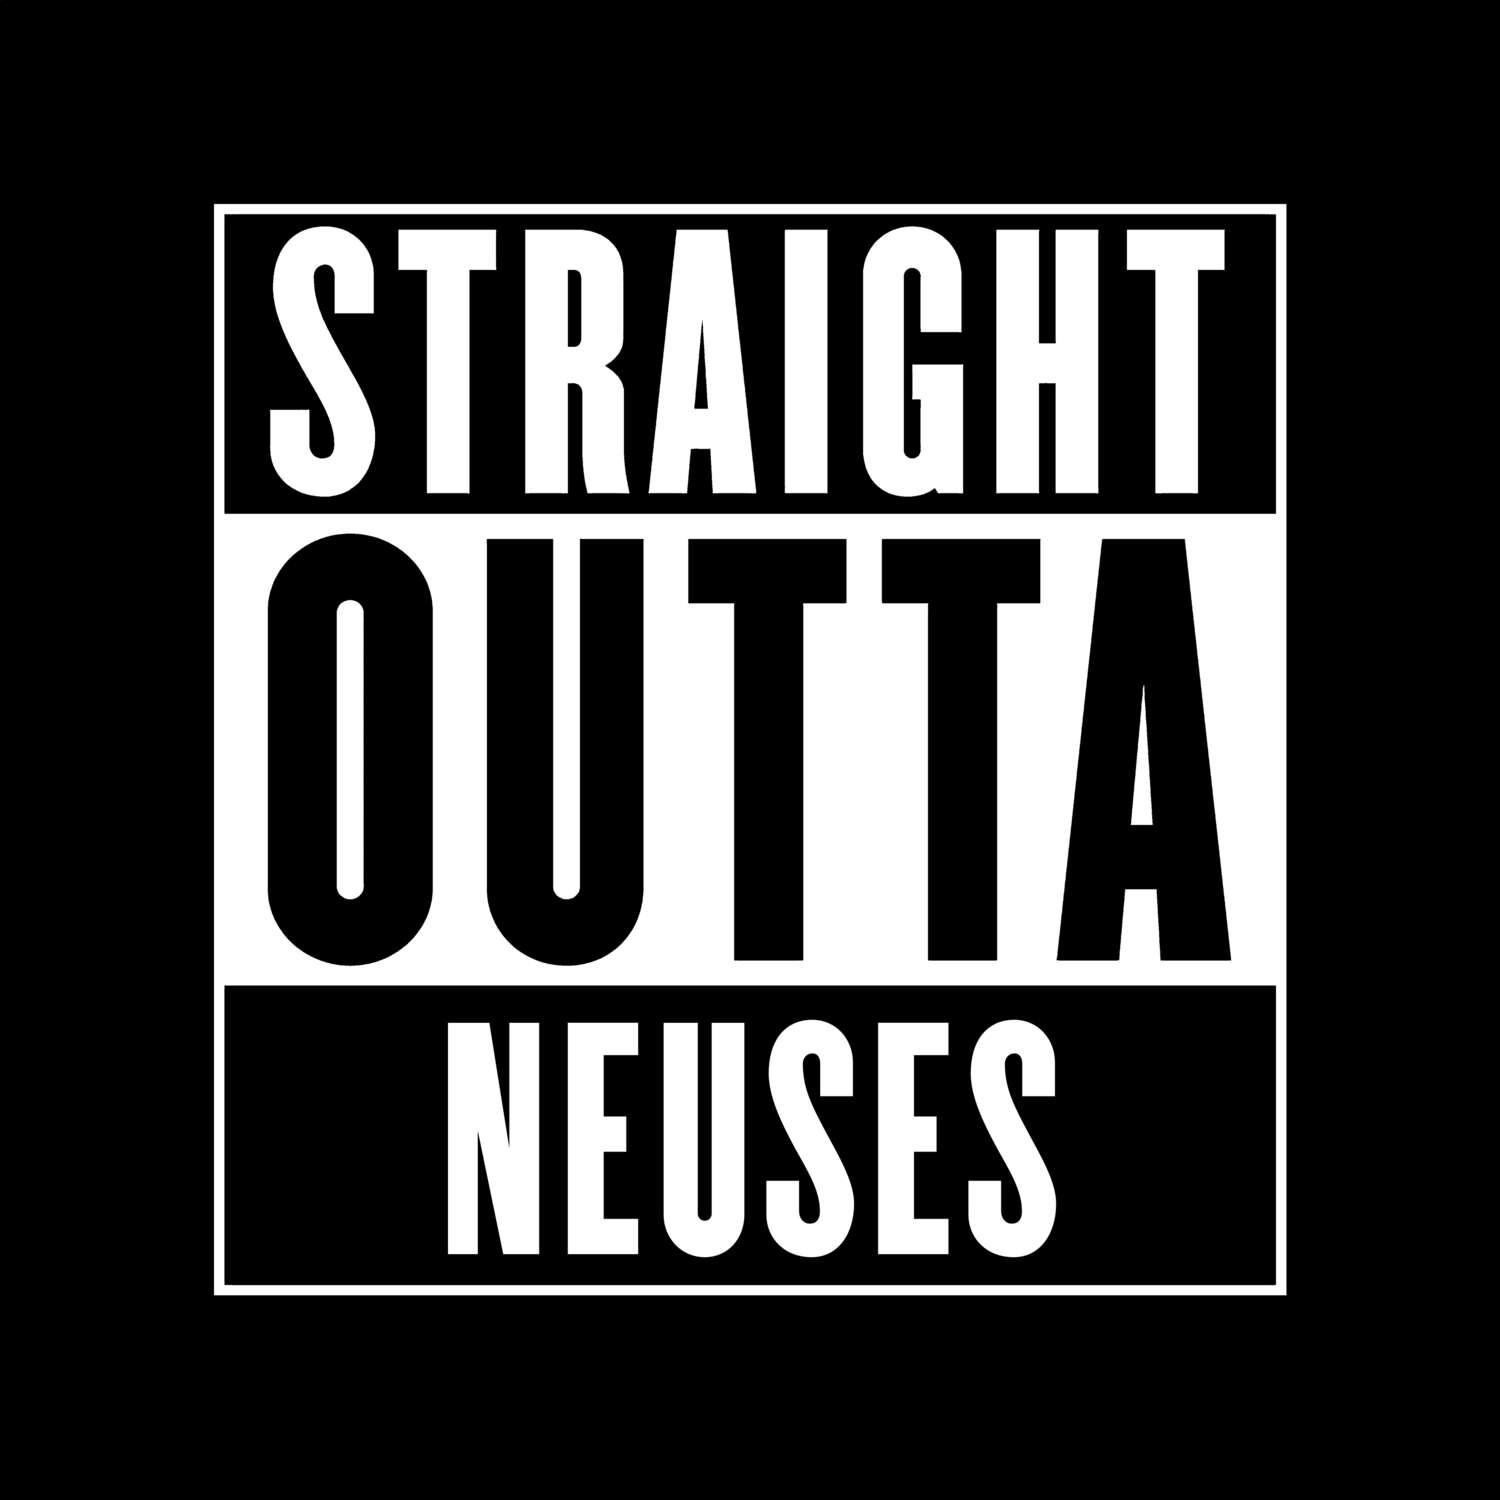 Neuses T-Shirt »Straight Outta«